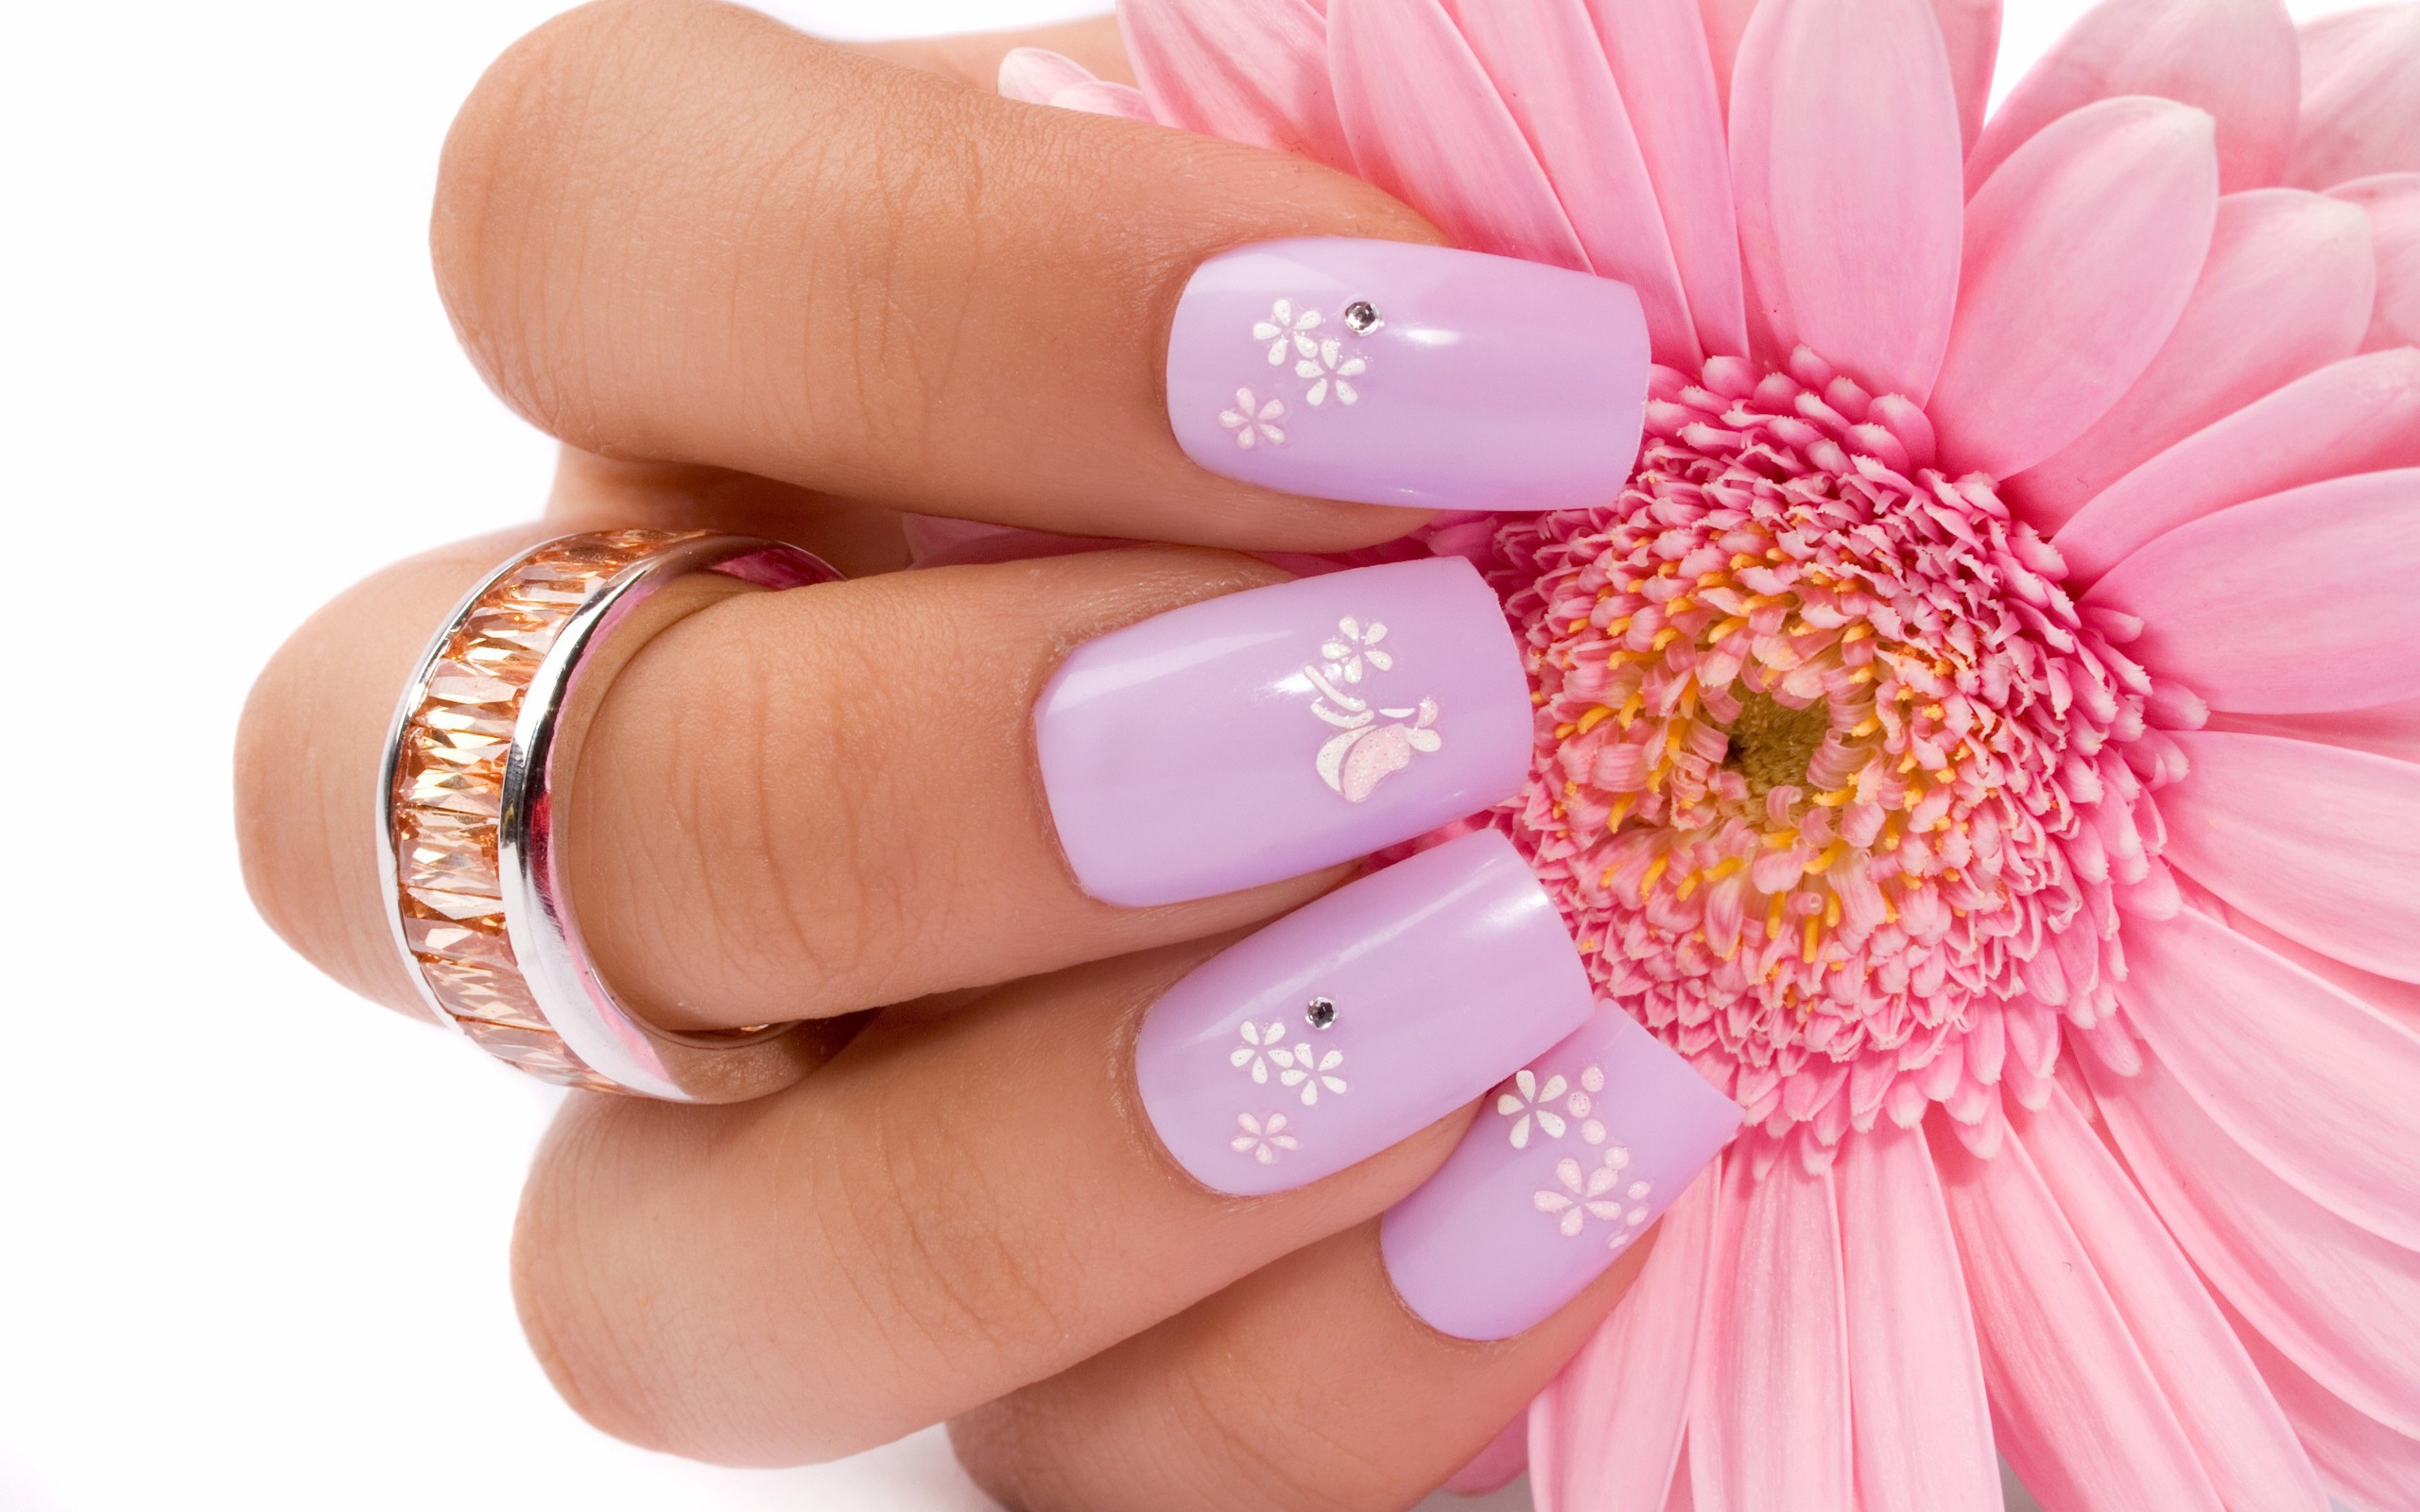 9. "Cute and Fun Nail Art Pictures for Girls" - wide 8